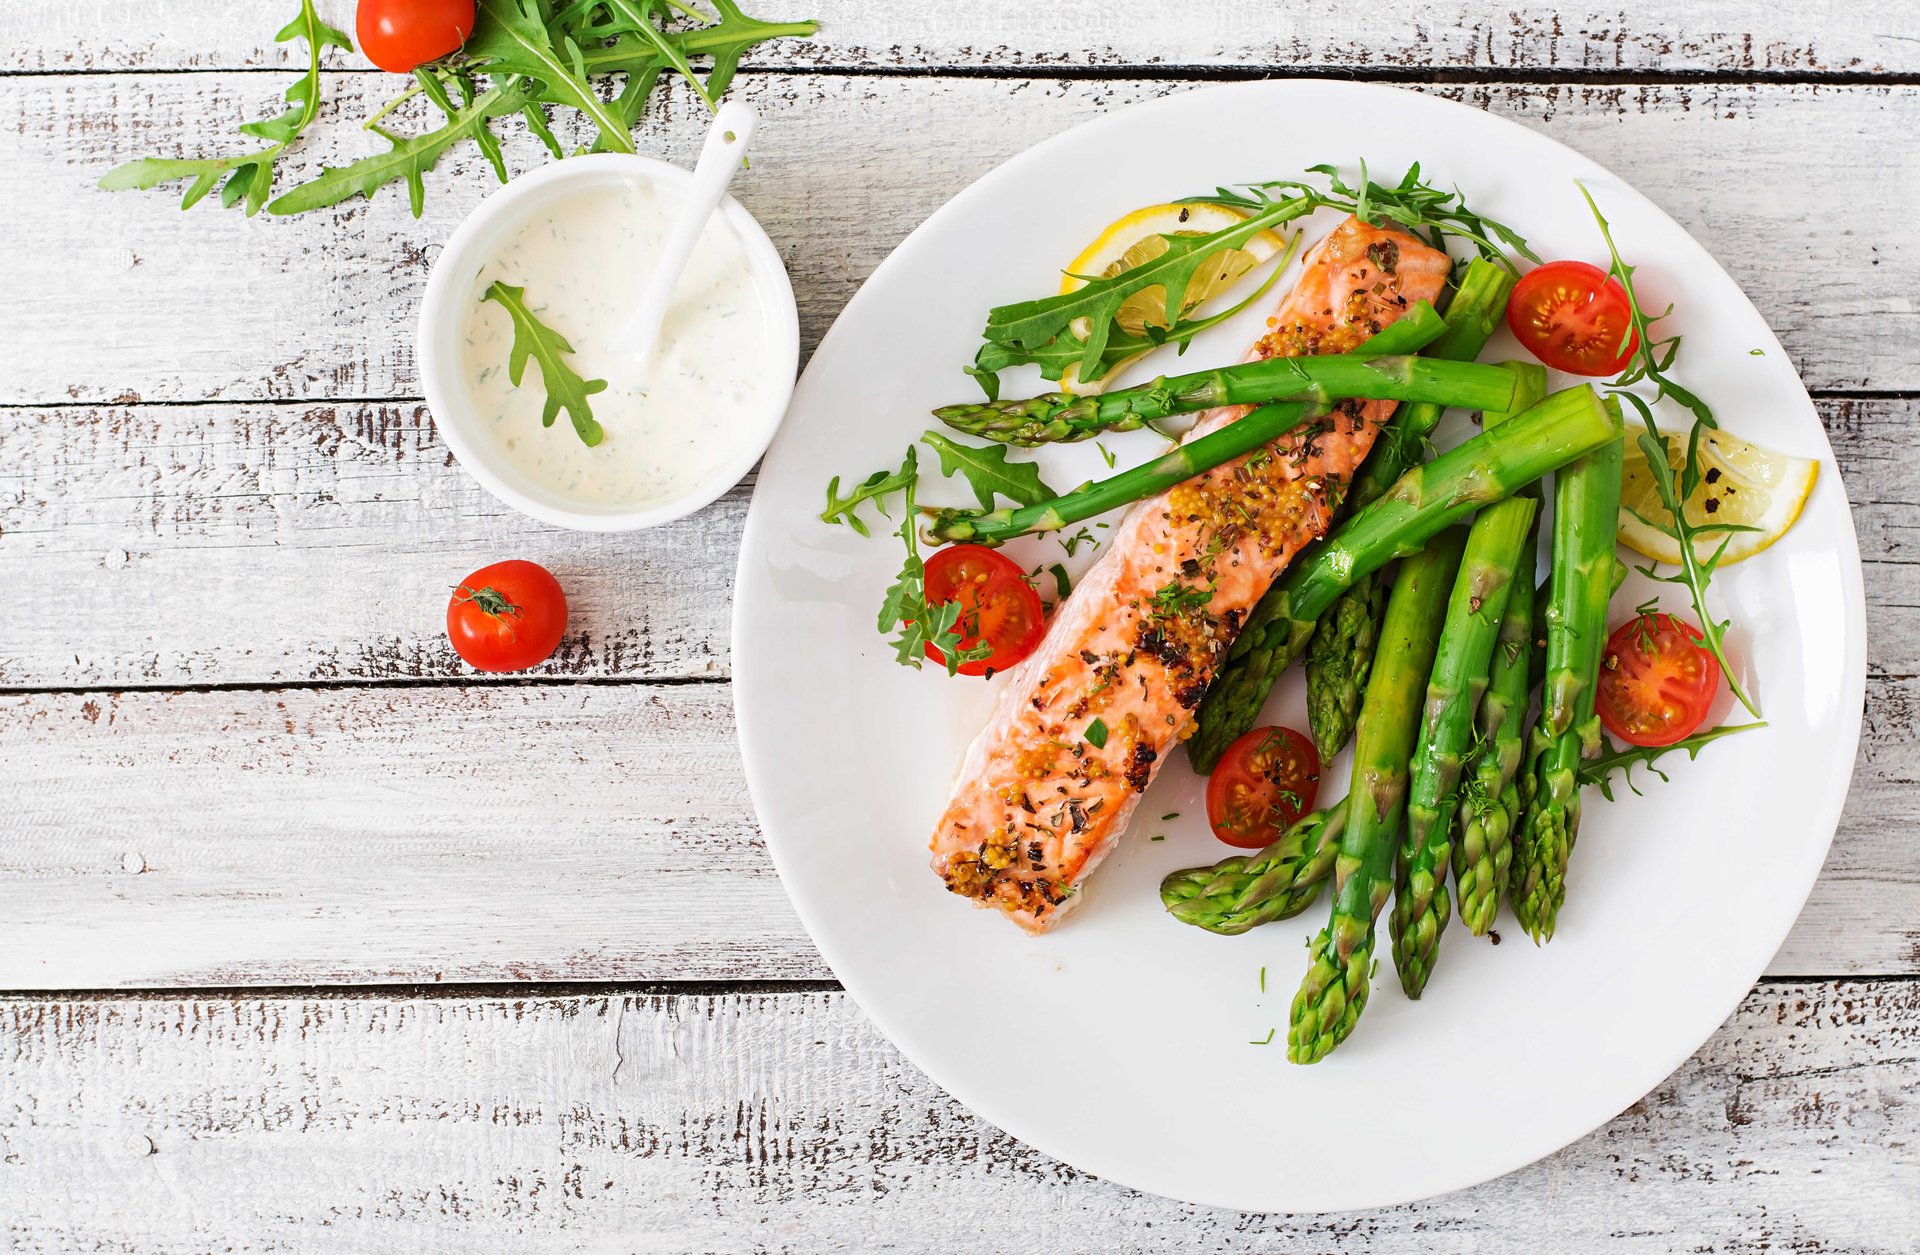 baked salmon with herbs, tomatoes and asparagus